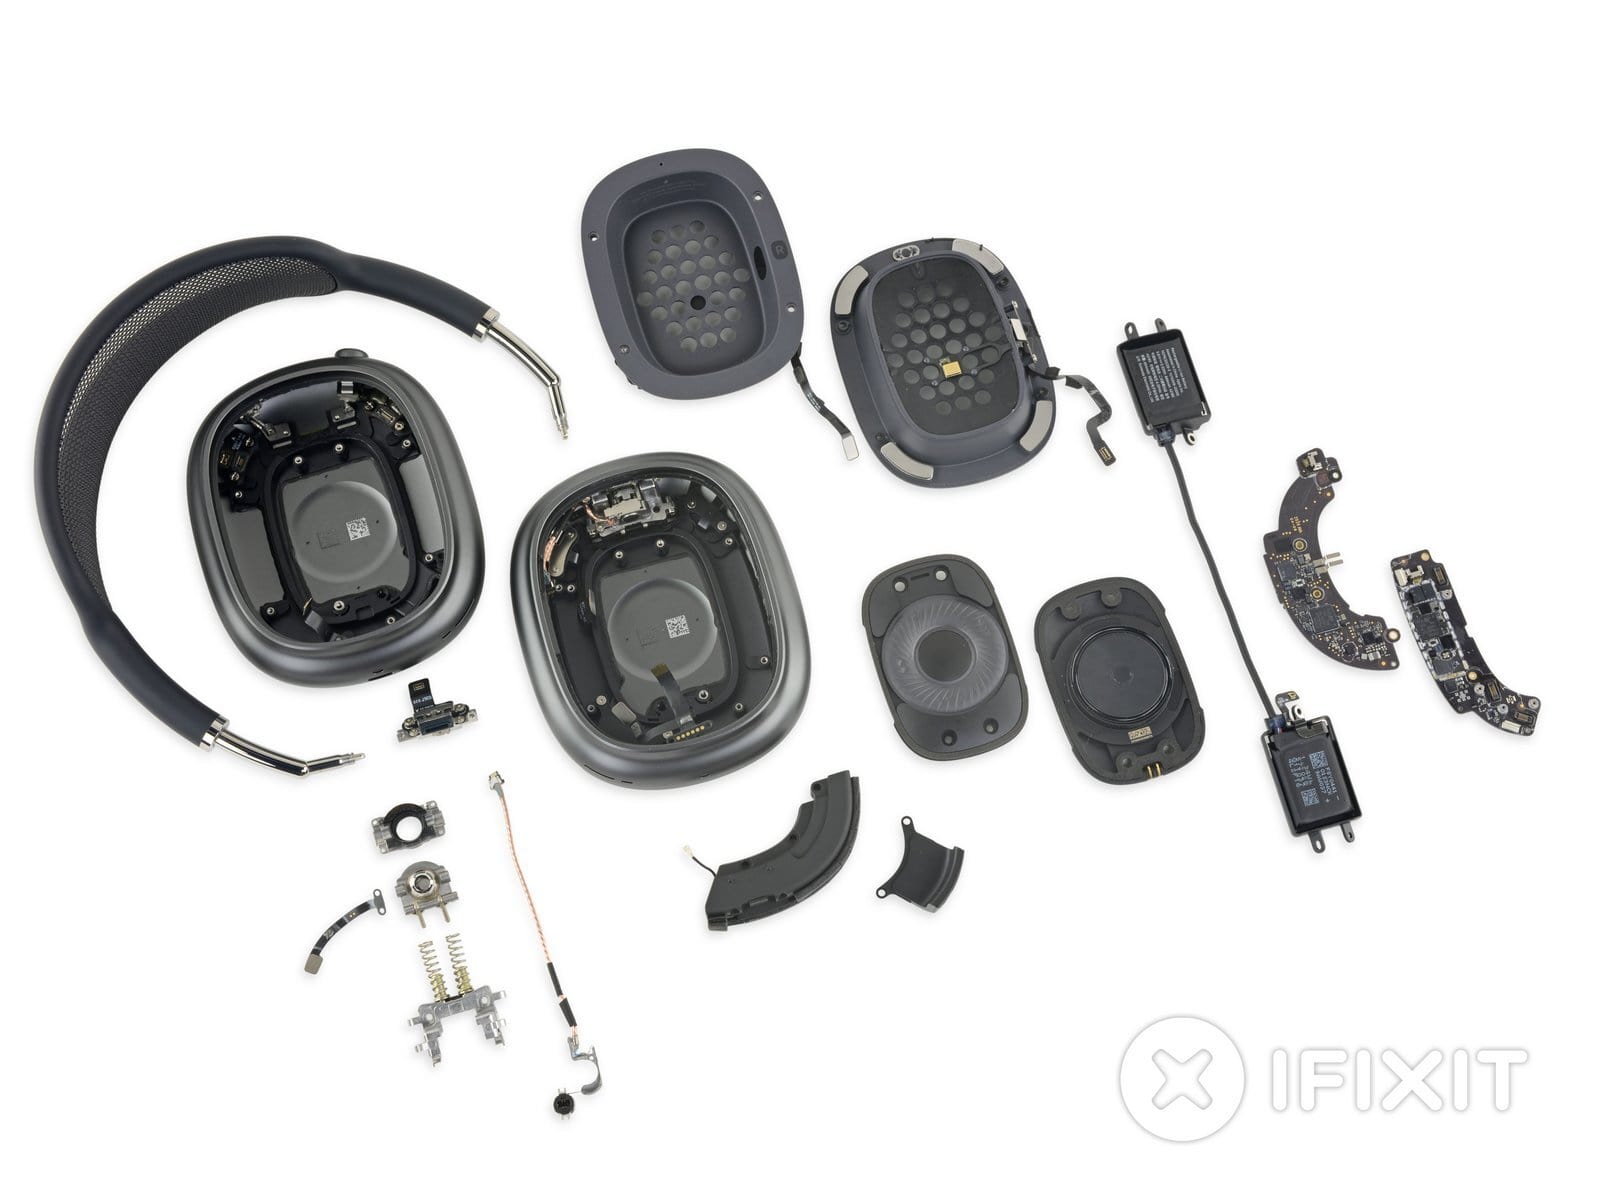 Apple AirPods Max teardown by iFixit shows impressive build and possibility of repair